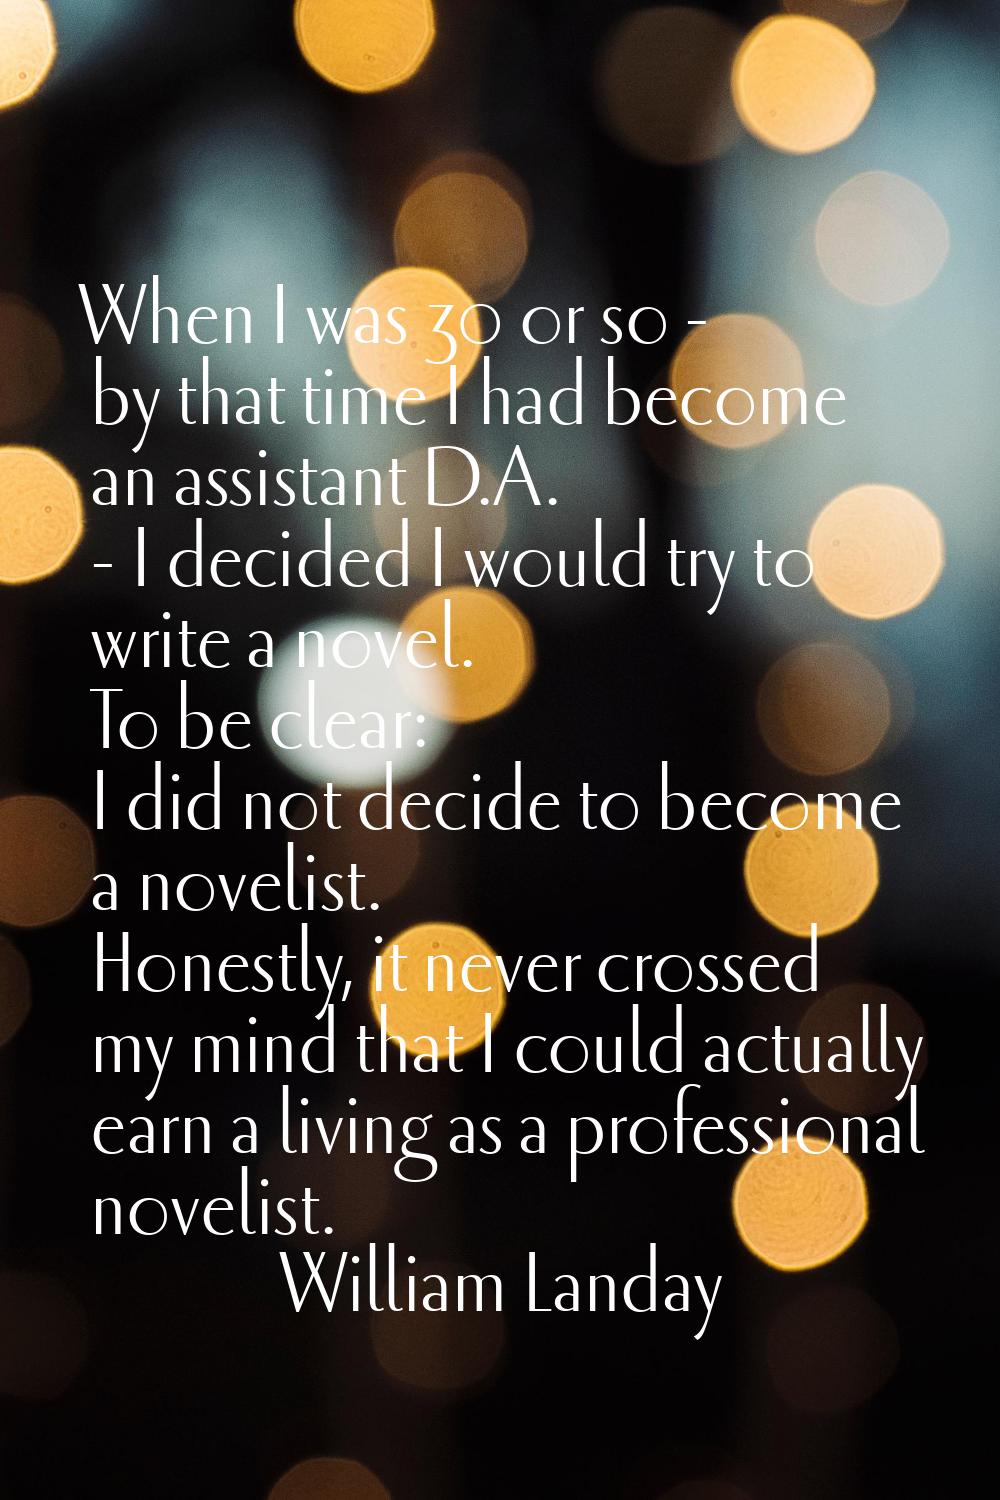 When I was 30 or so - by that time I had become an assistant D.A. - I decided I would try to write 